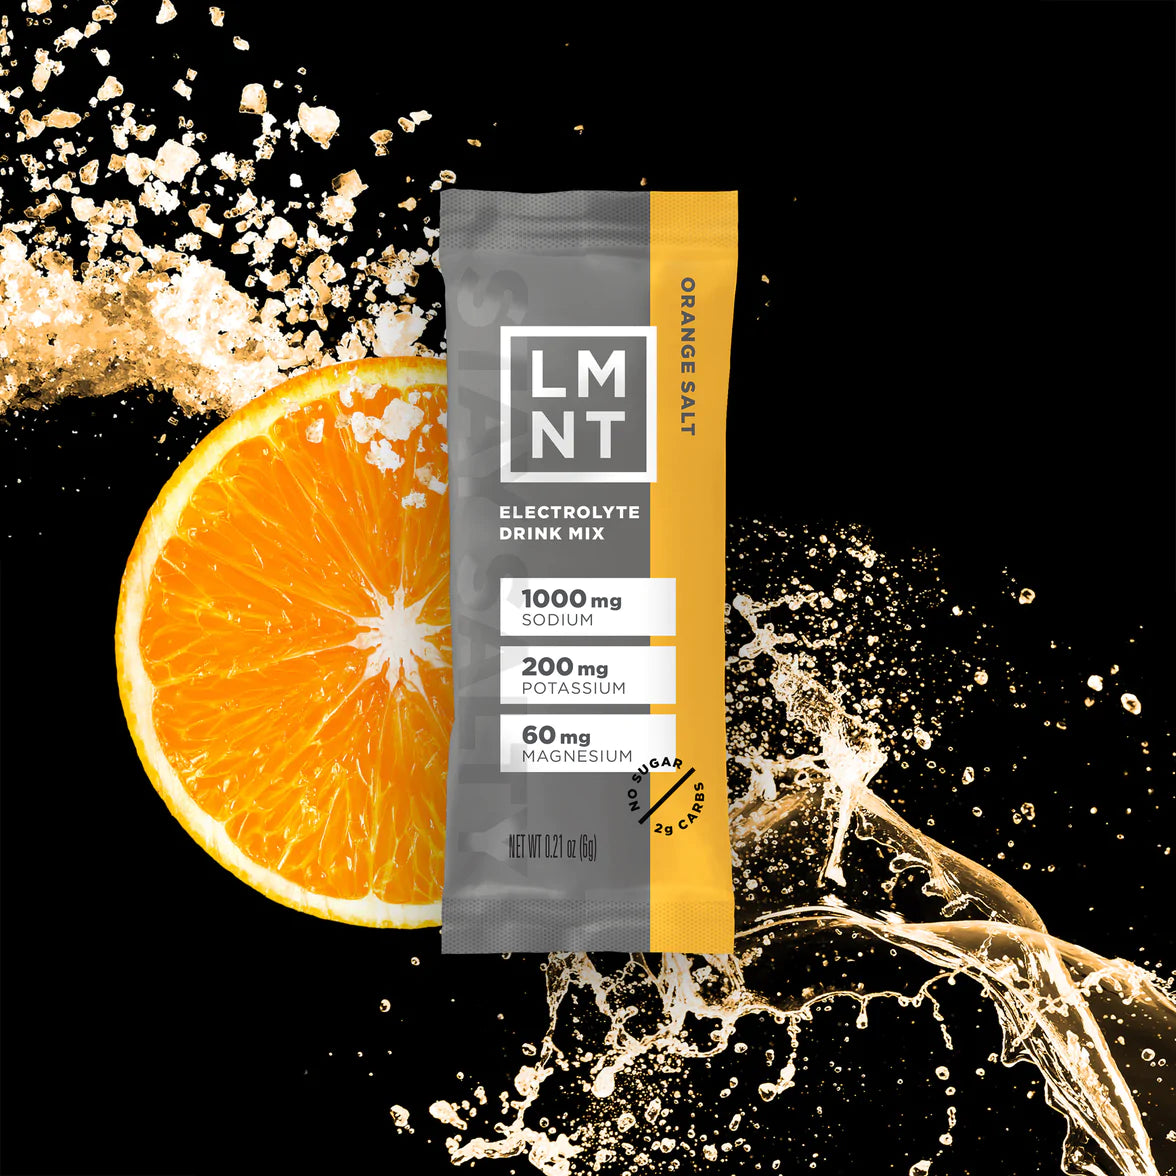 Drink Lmnt Electrolyte Mix, Raw Unflavored 30 Sticks